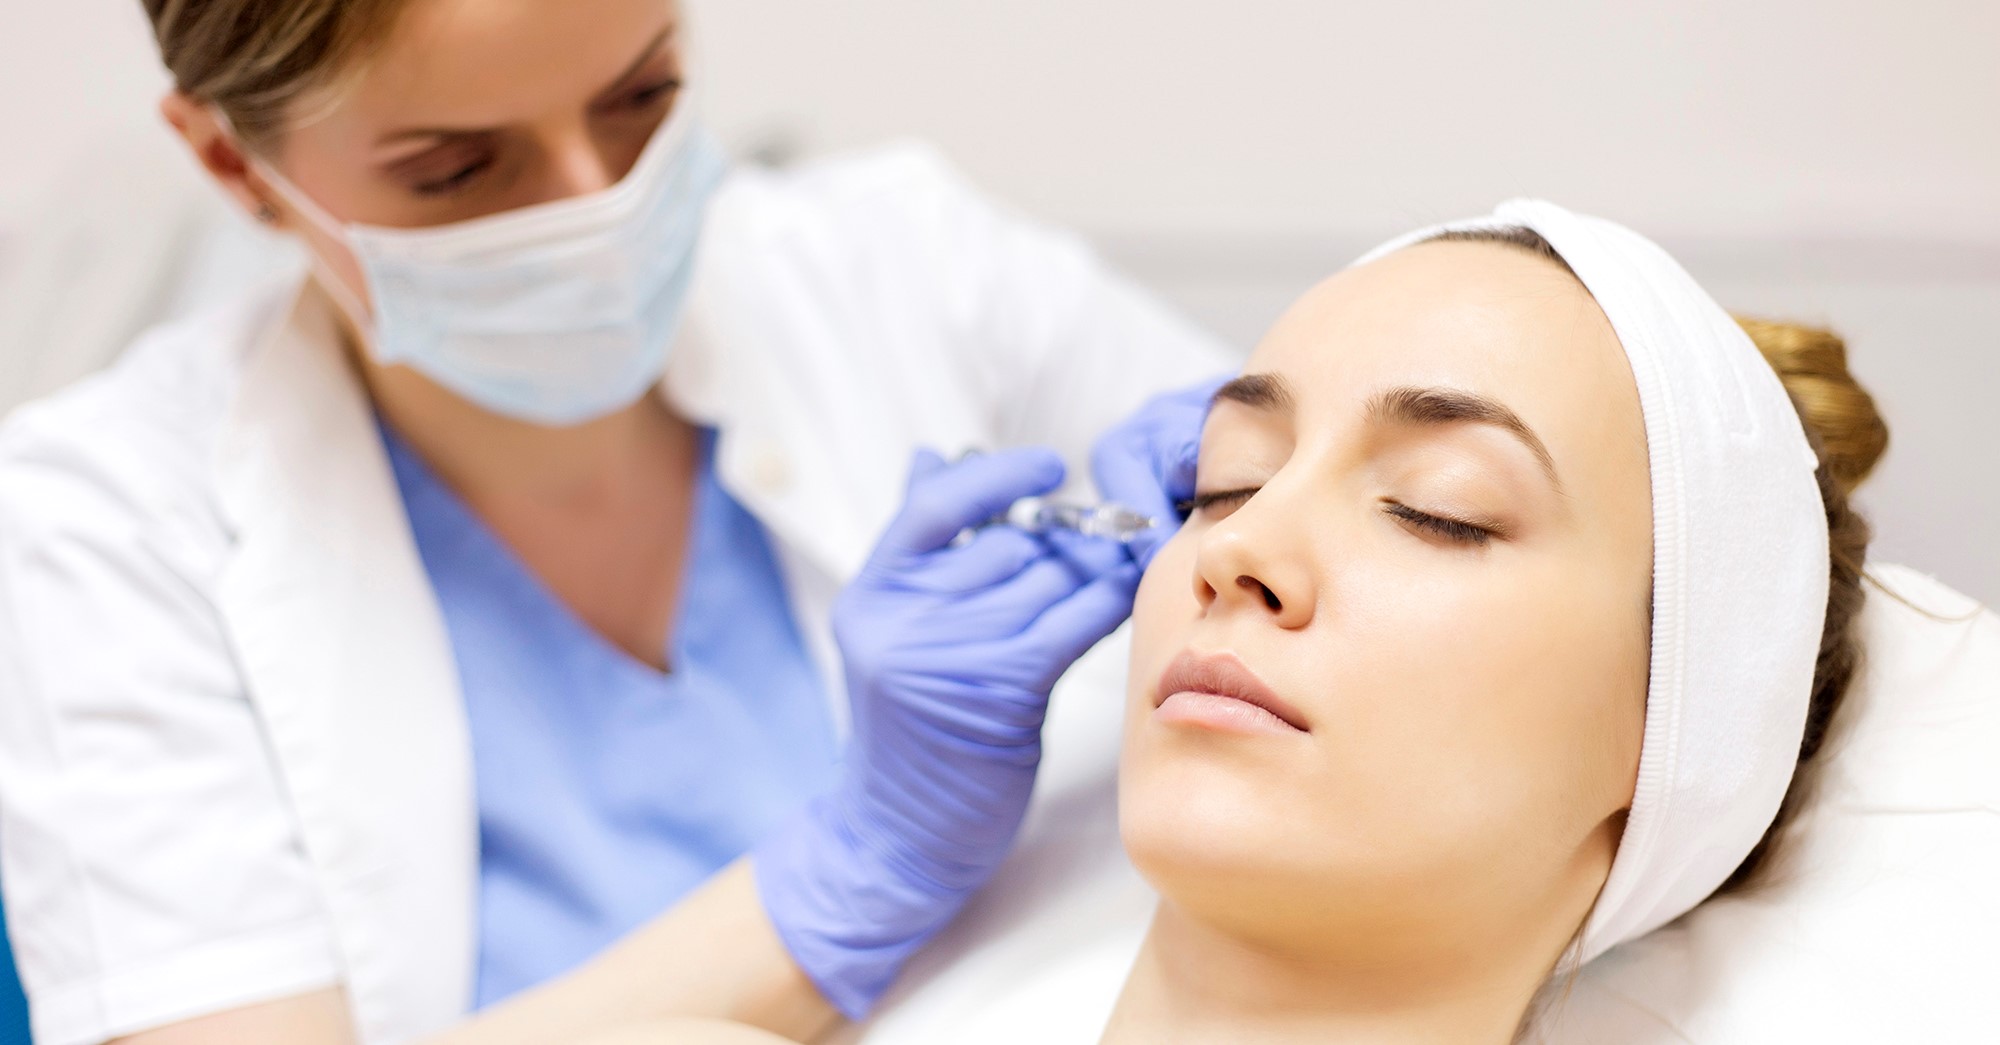 Cosmetic treatments is one of the reasons Harley Street is popular for cosmetic tourism. In this image, a client is laying down with her eyes closed while being injected with botox by a specialist.